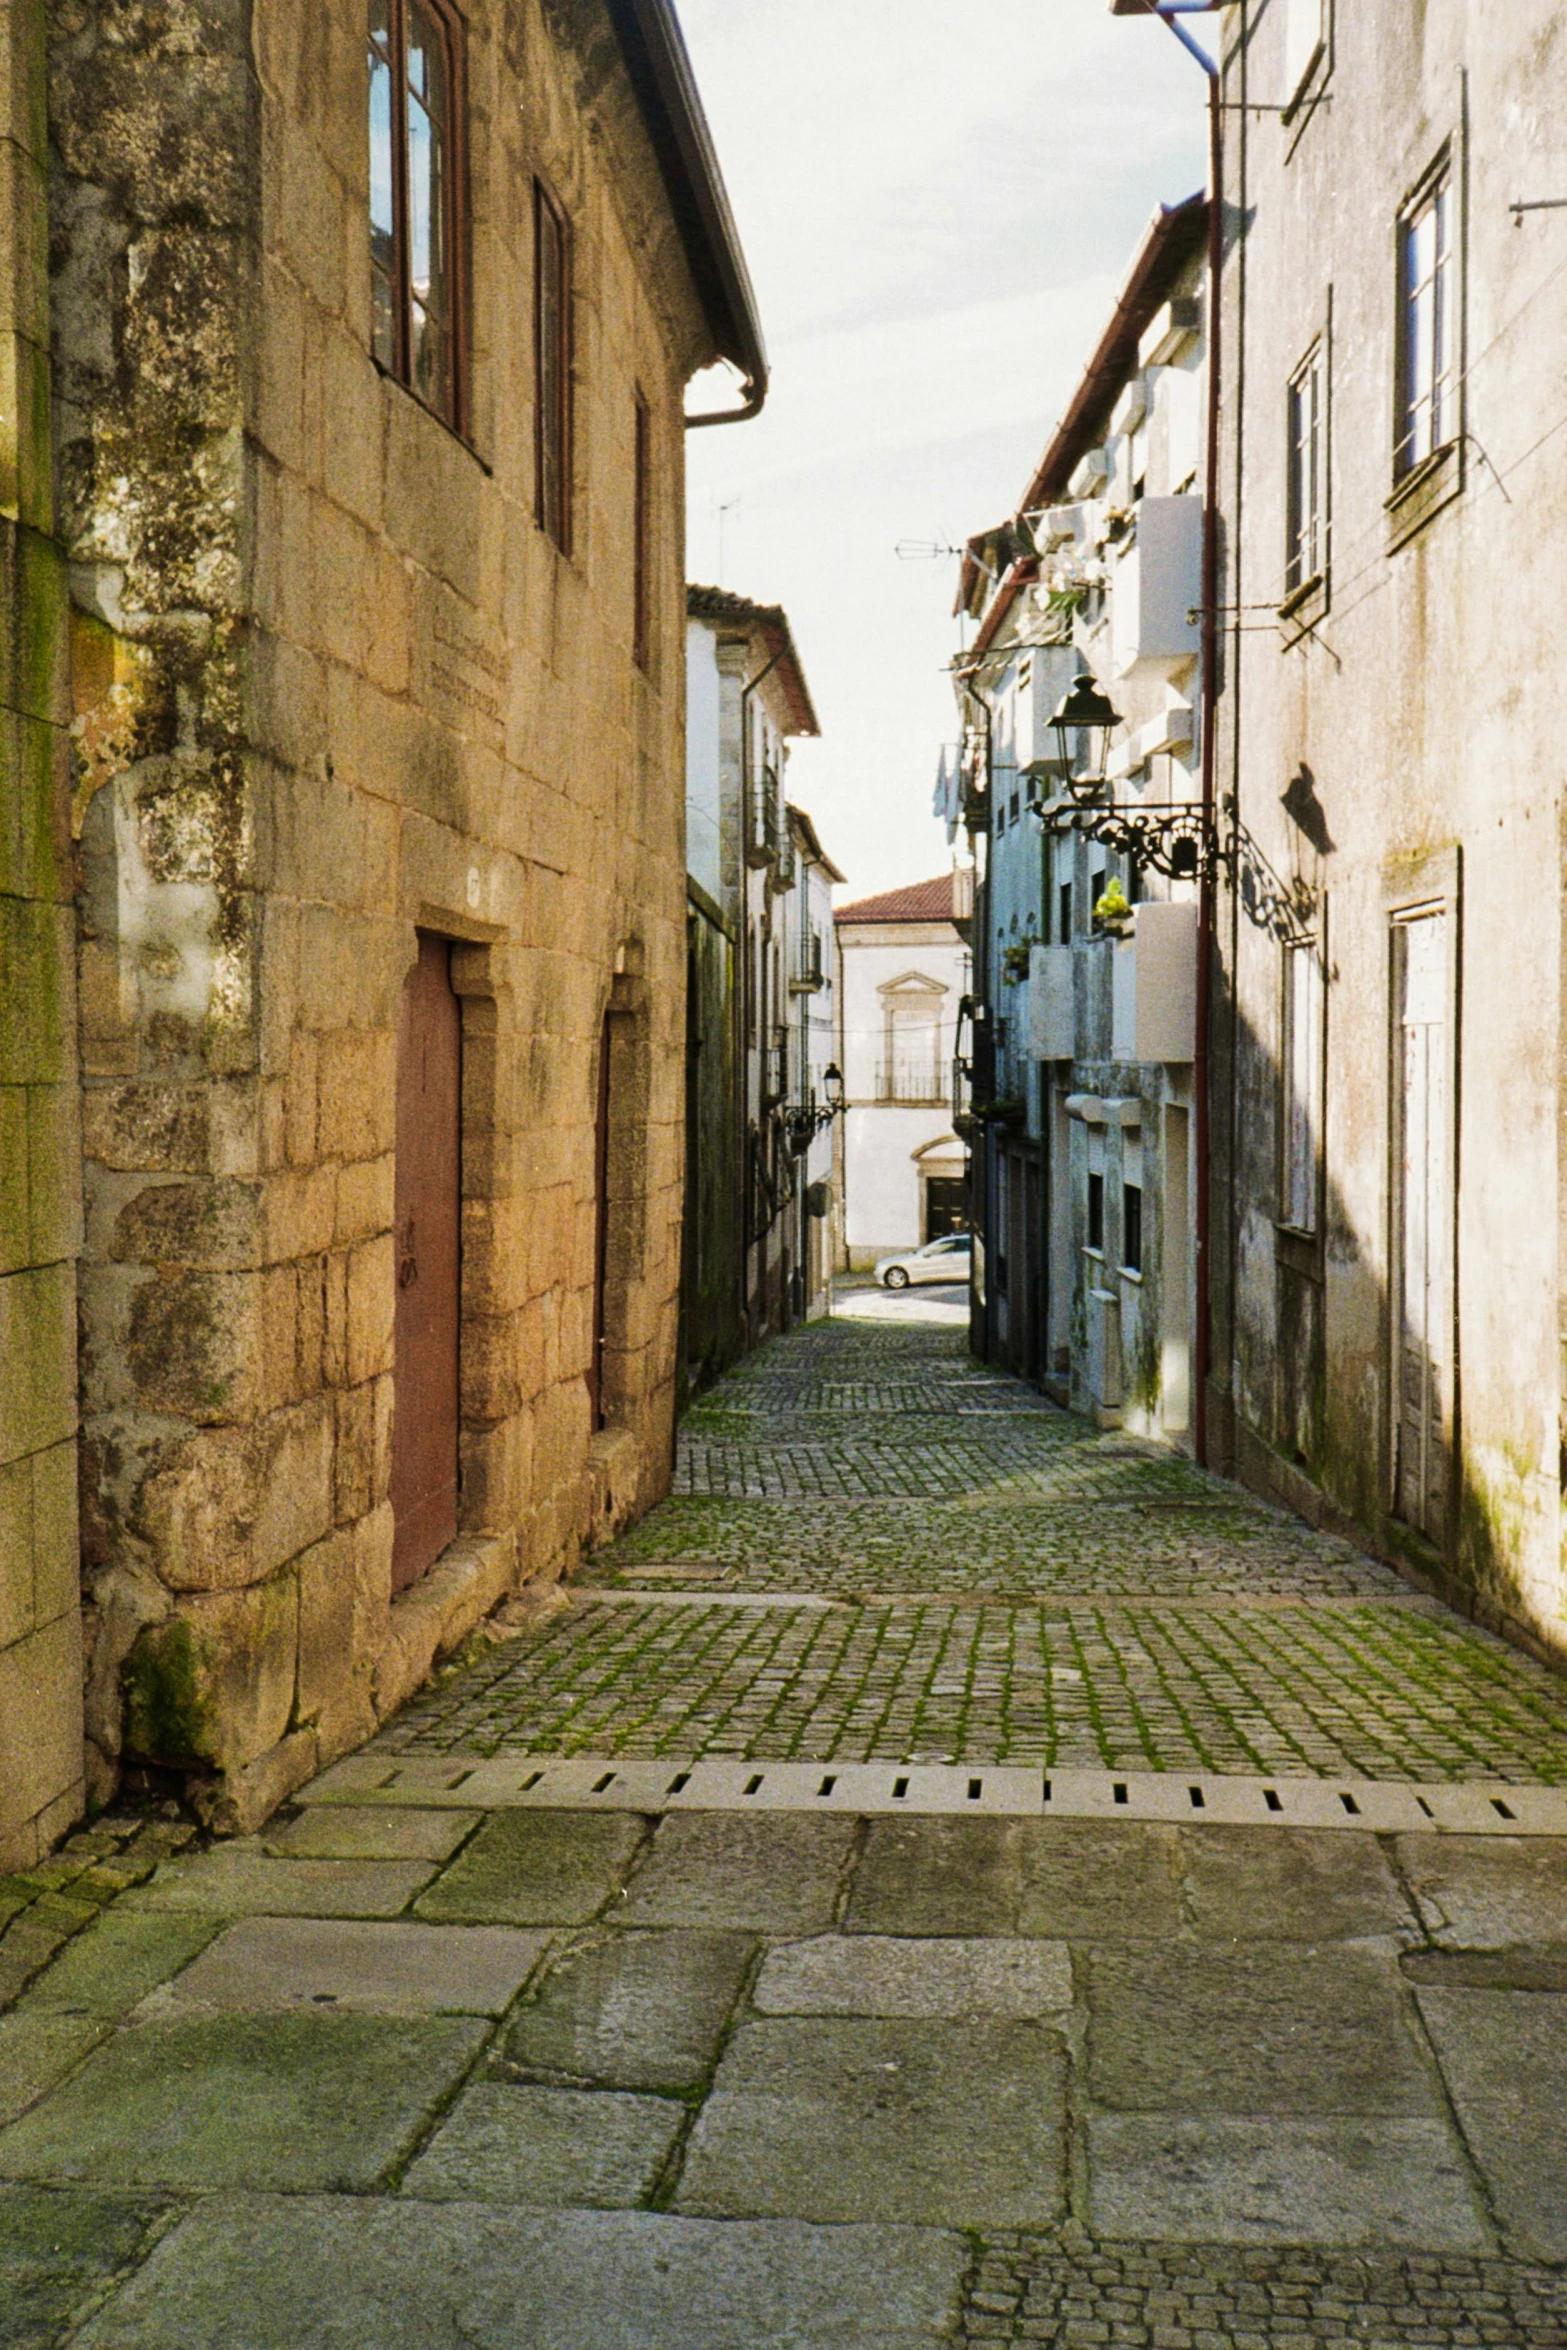 narrow street with old buildings, a telephone tower, and tiled cobblestone walkway